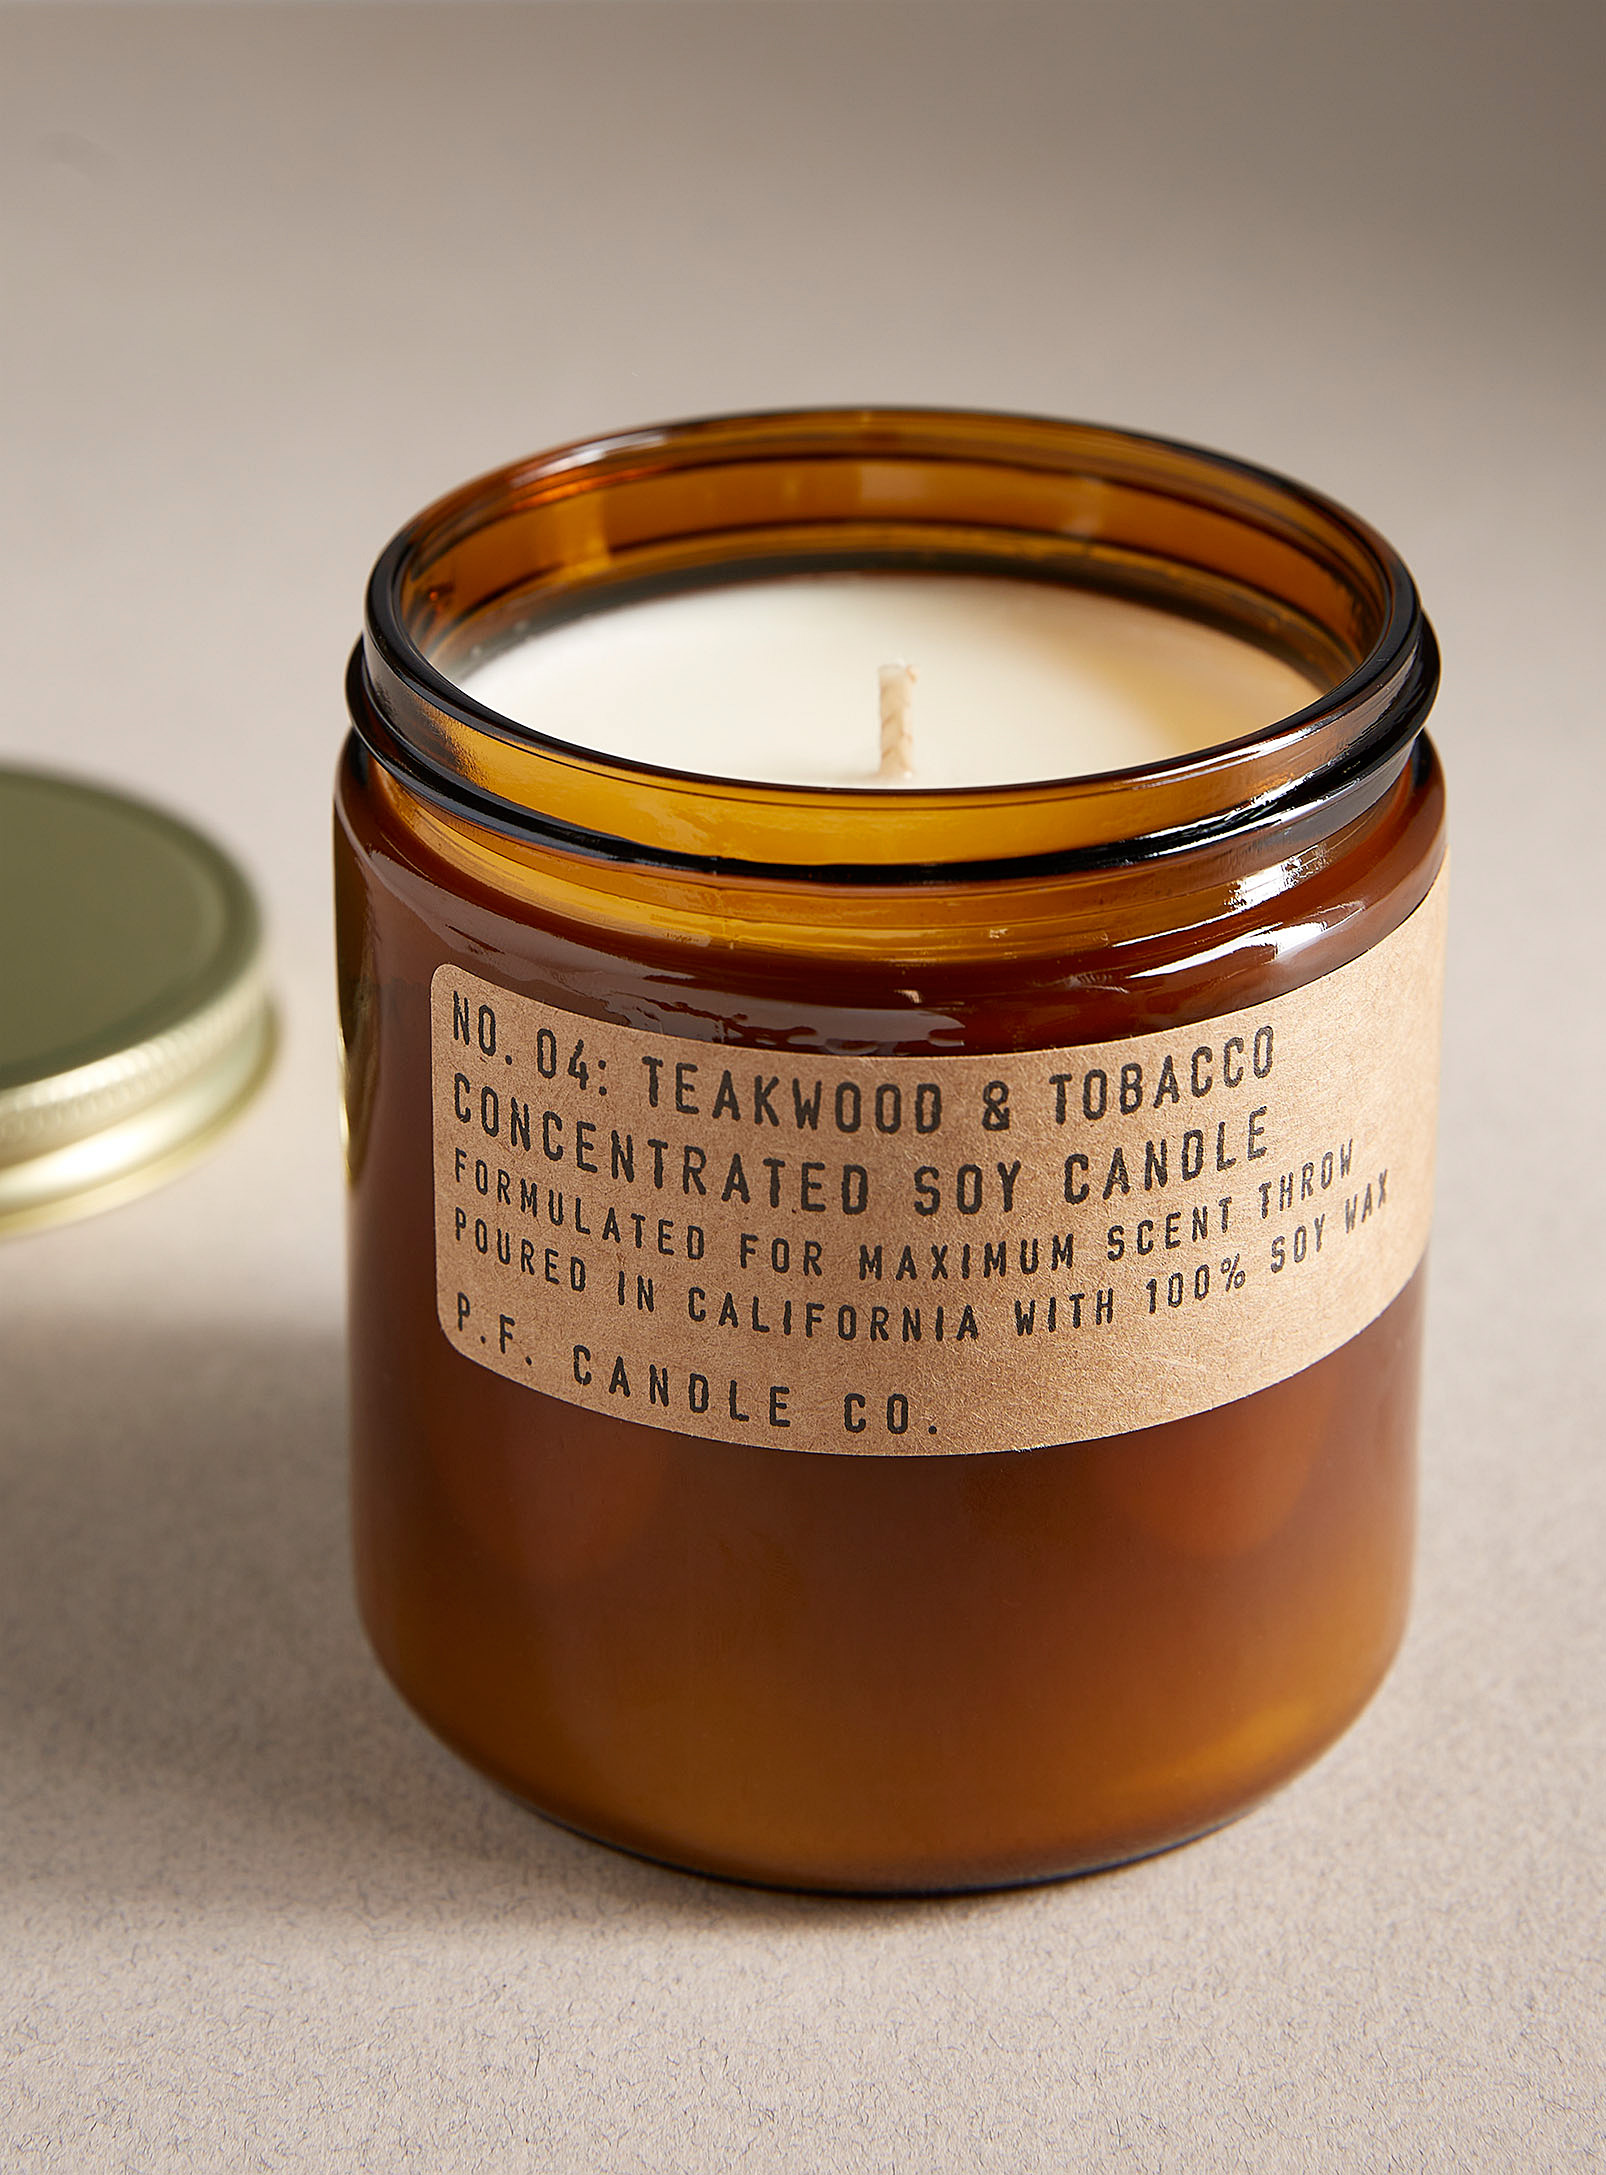 P.F. Candle Co. - Teakwood tobacco scented candle 354 g